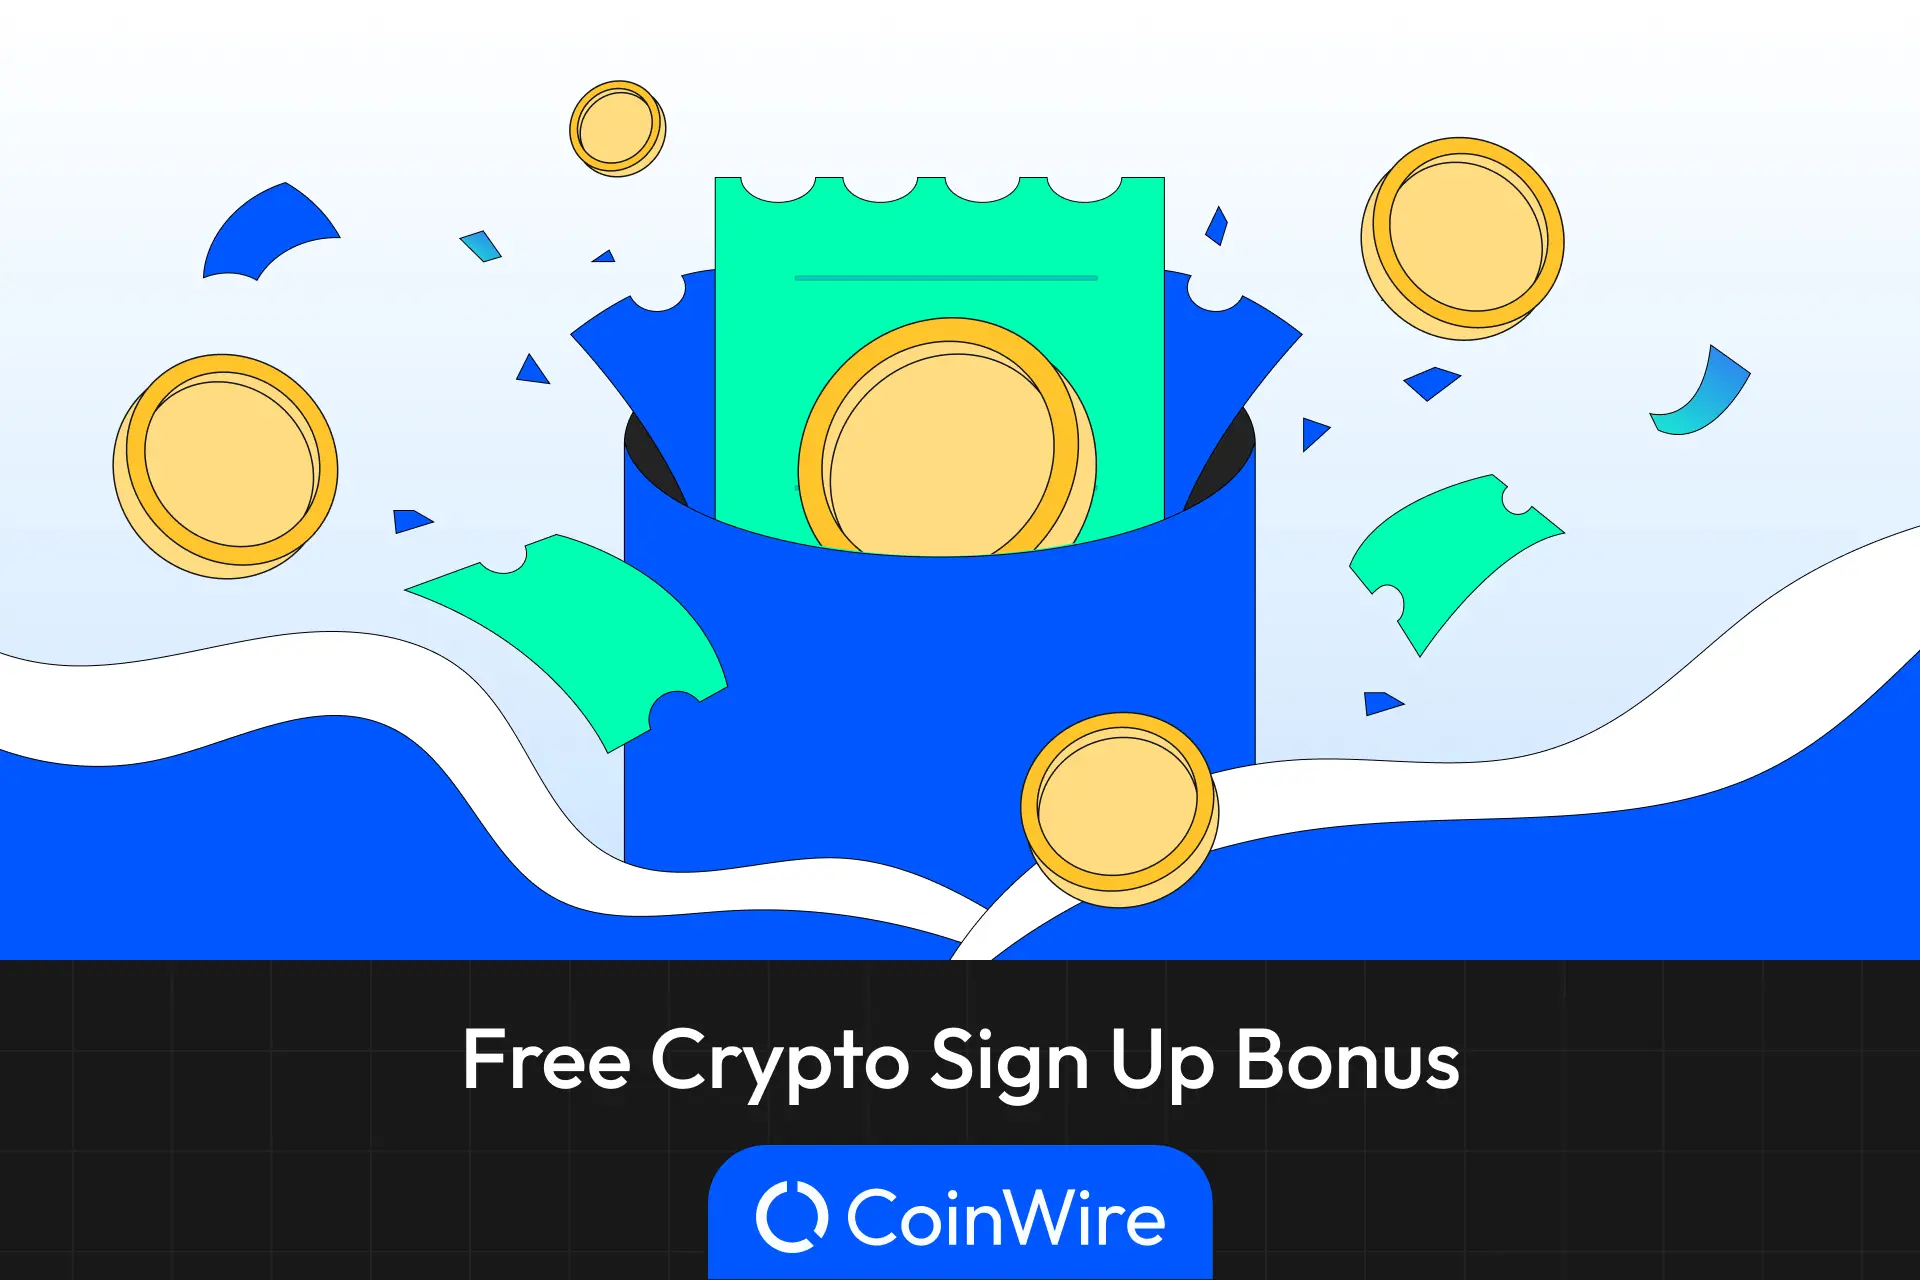 11 Ways to Earn Free Crypto (With Fast Payouts) - Updated